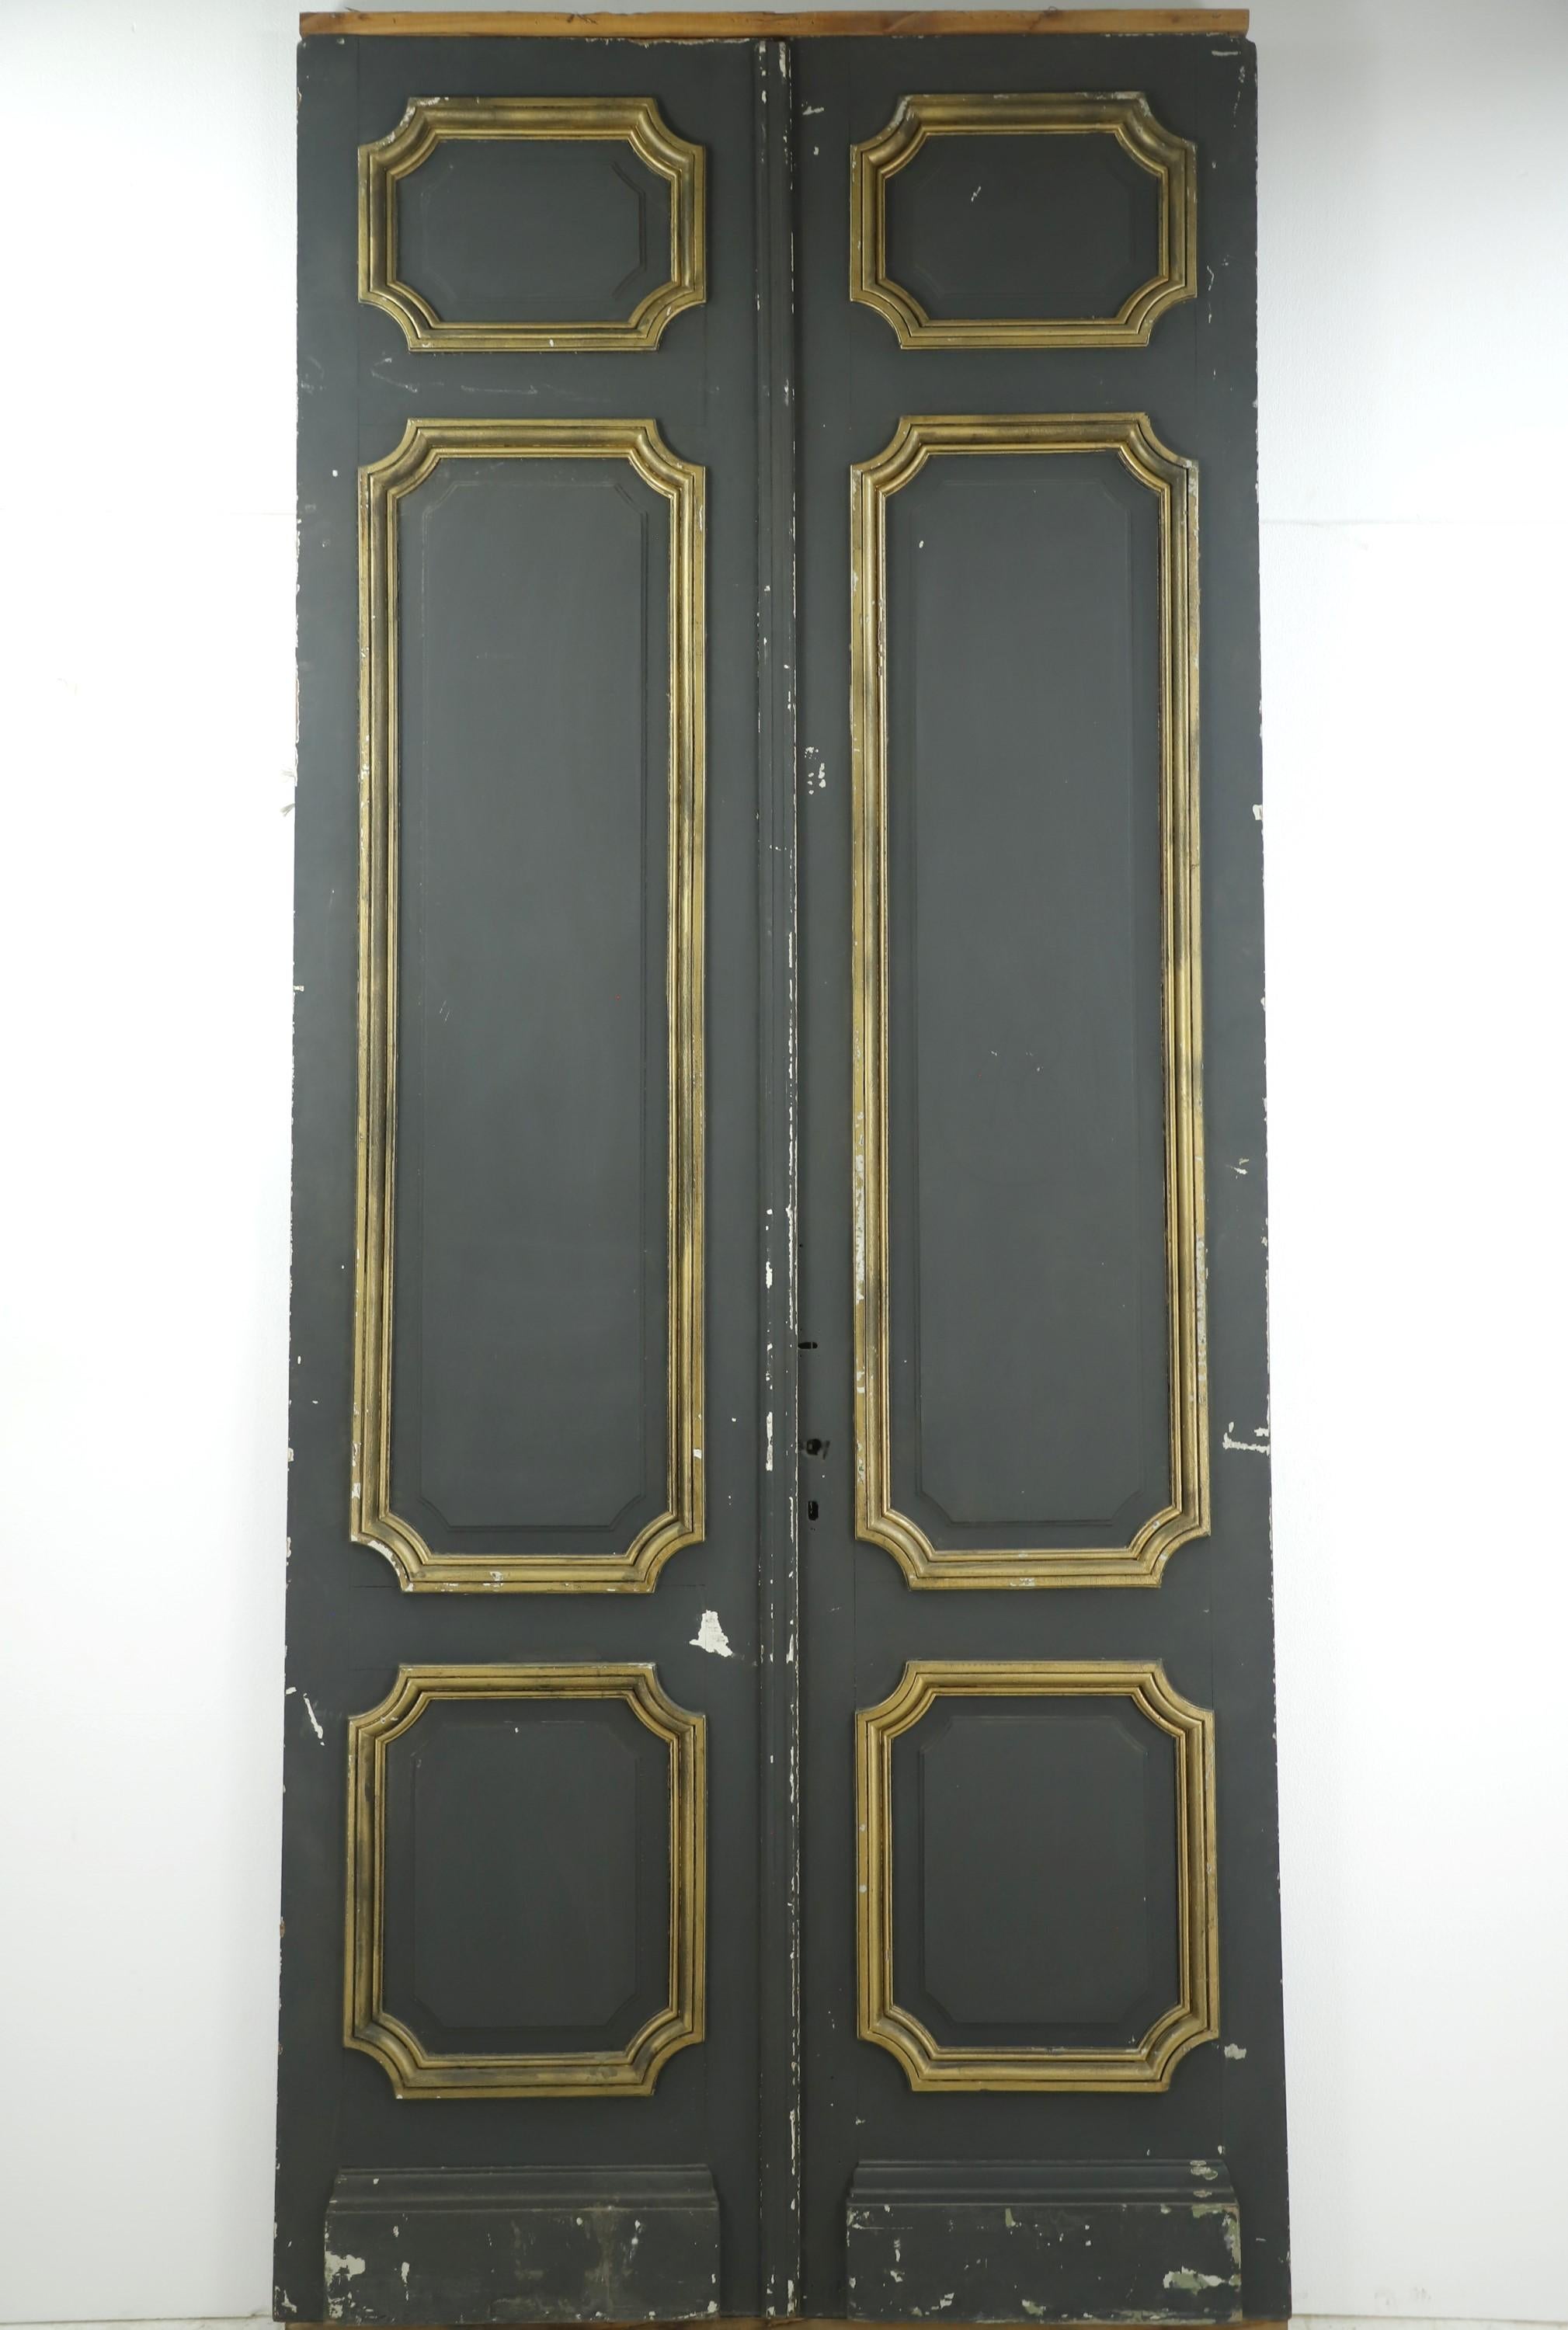 Antique Tall 3 Panel Wood Double Doors  6